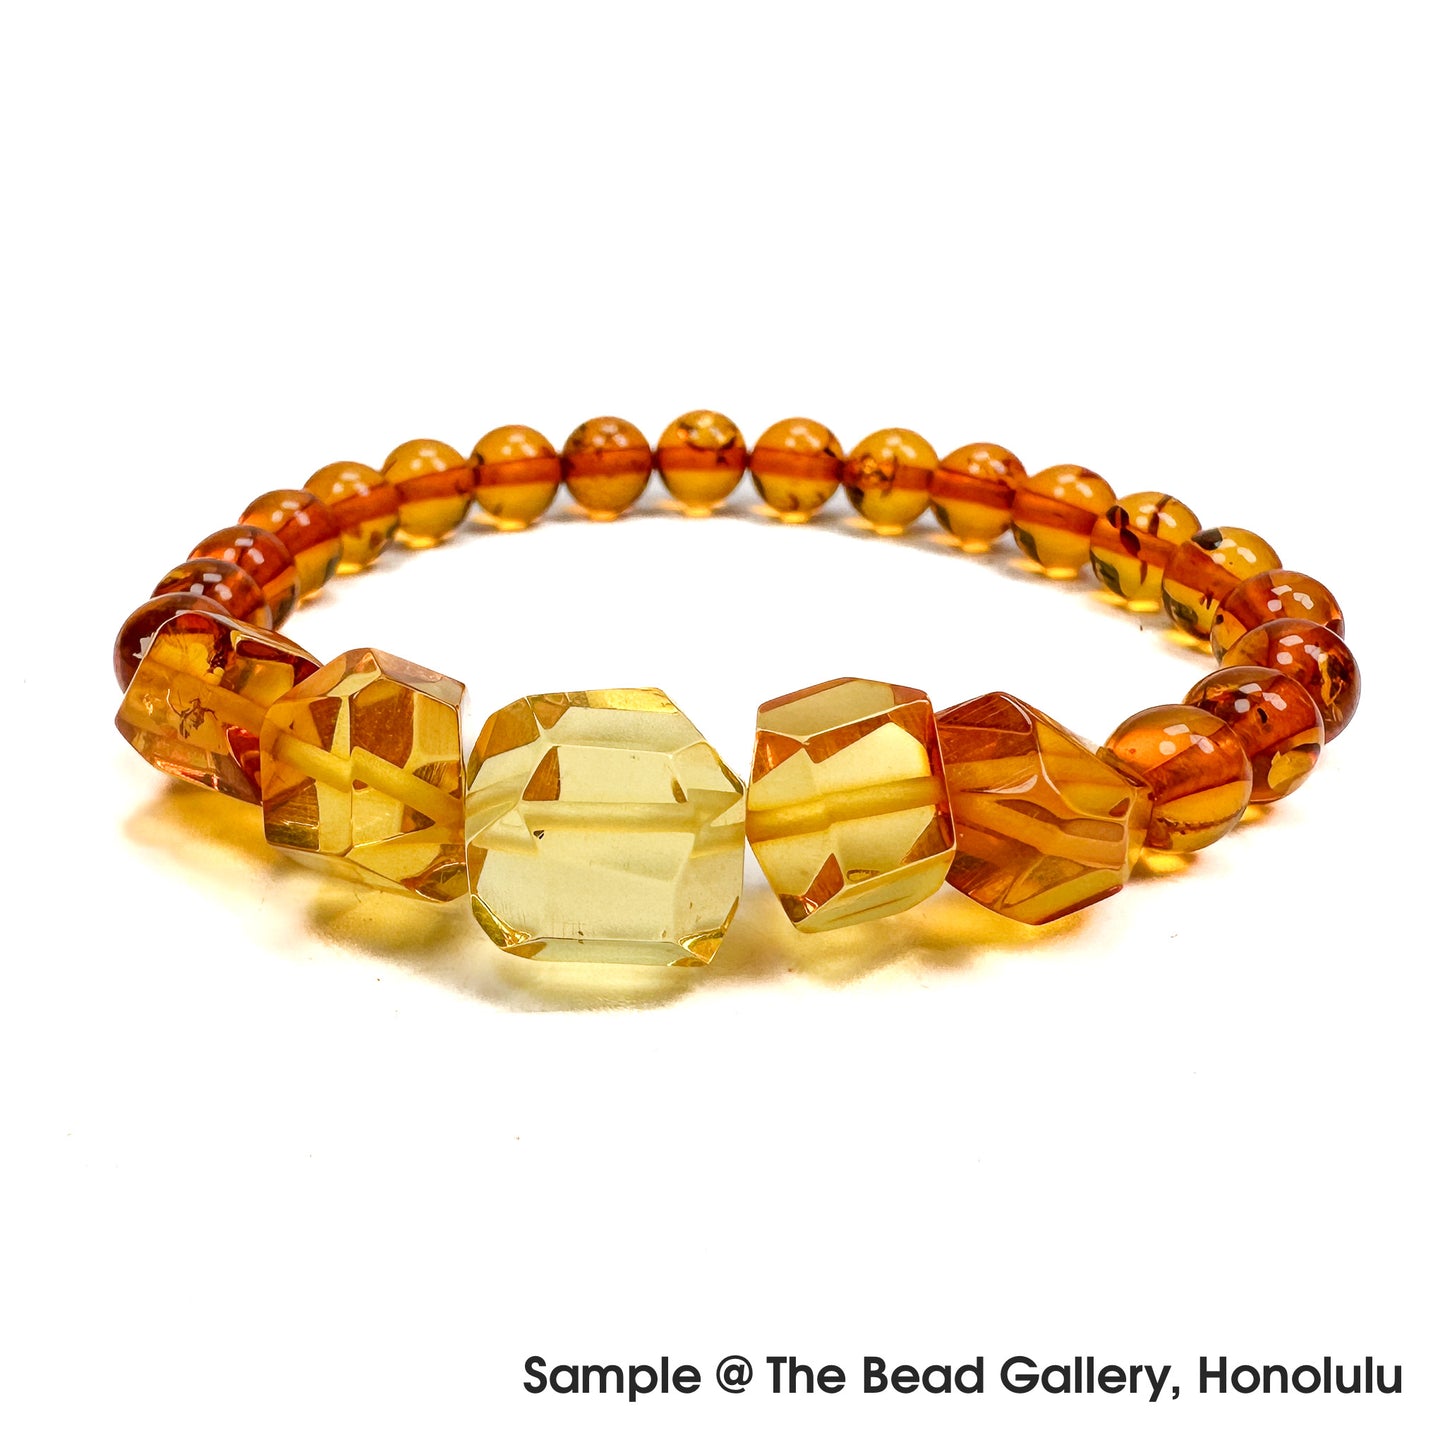 Amber 11-13mm Faceted Long Drill Bead - 1 pc.